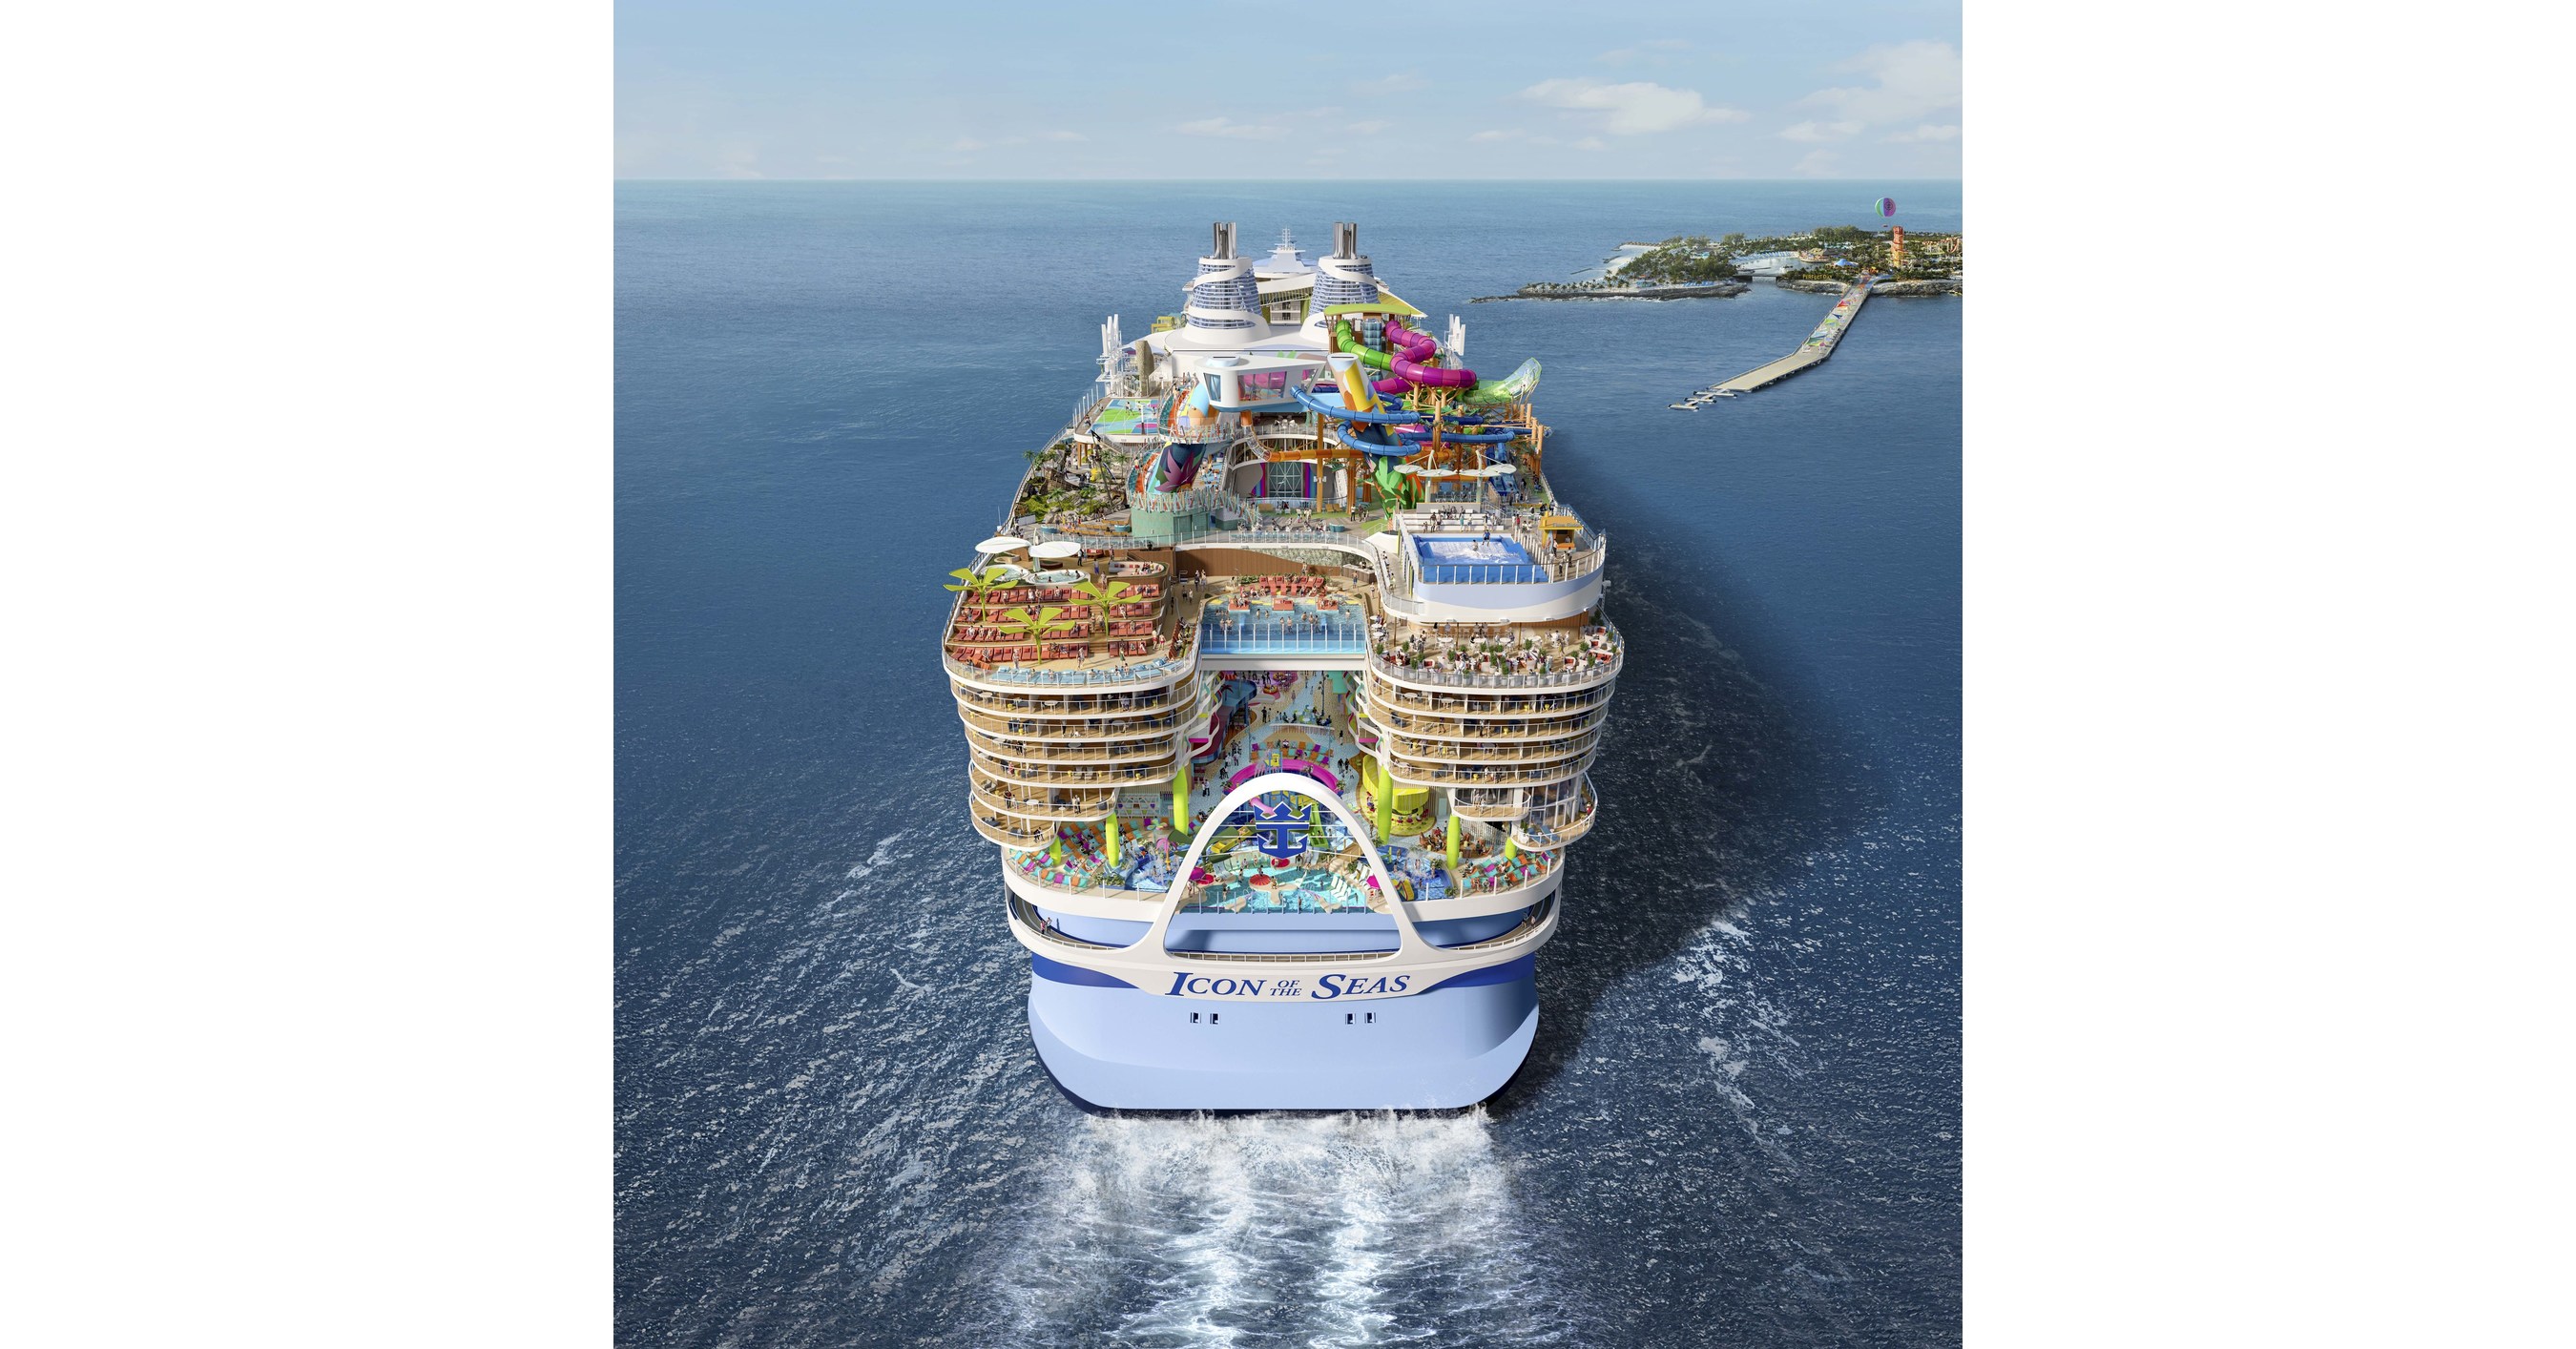 ROYAL CARIBBEAN INTERNATIONAL BREAKS BOOKINGS RECORDS FOR THIRD TIME IN 2022